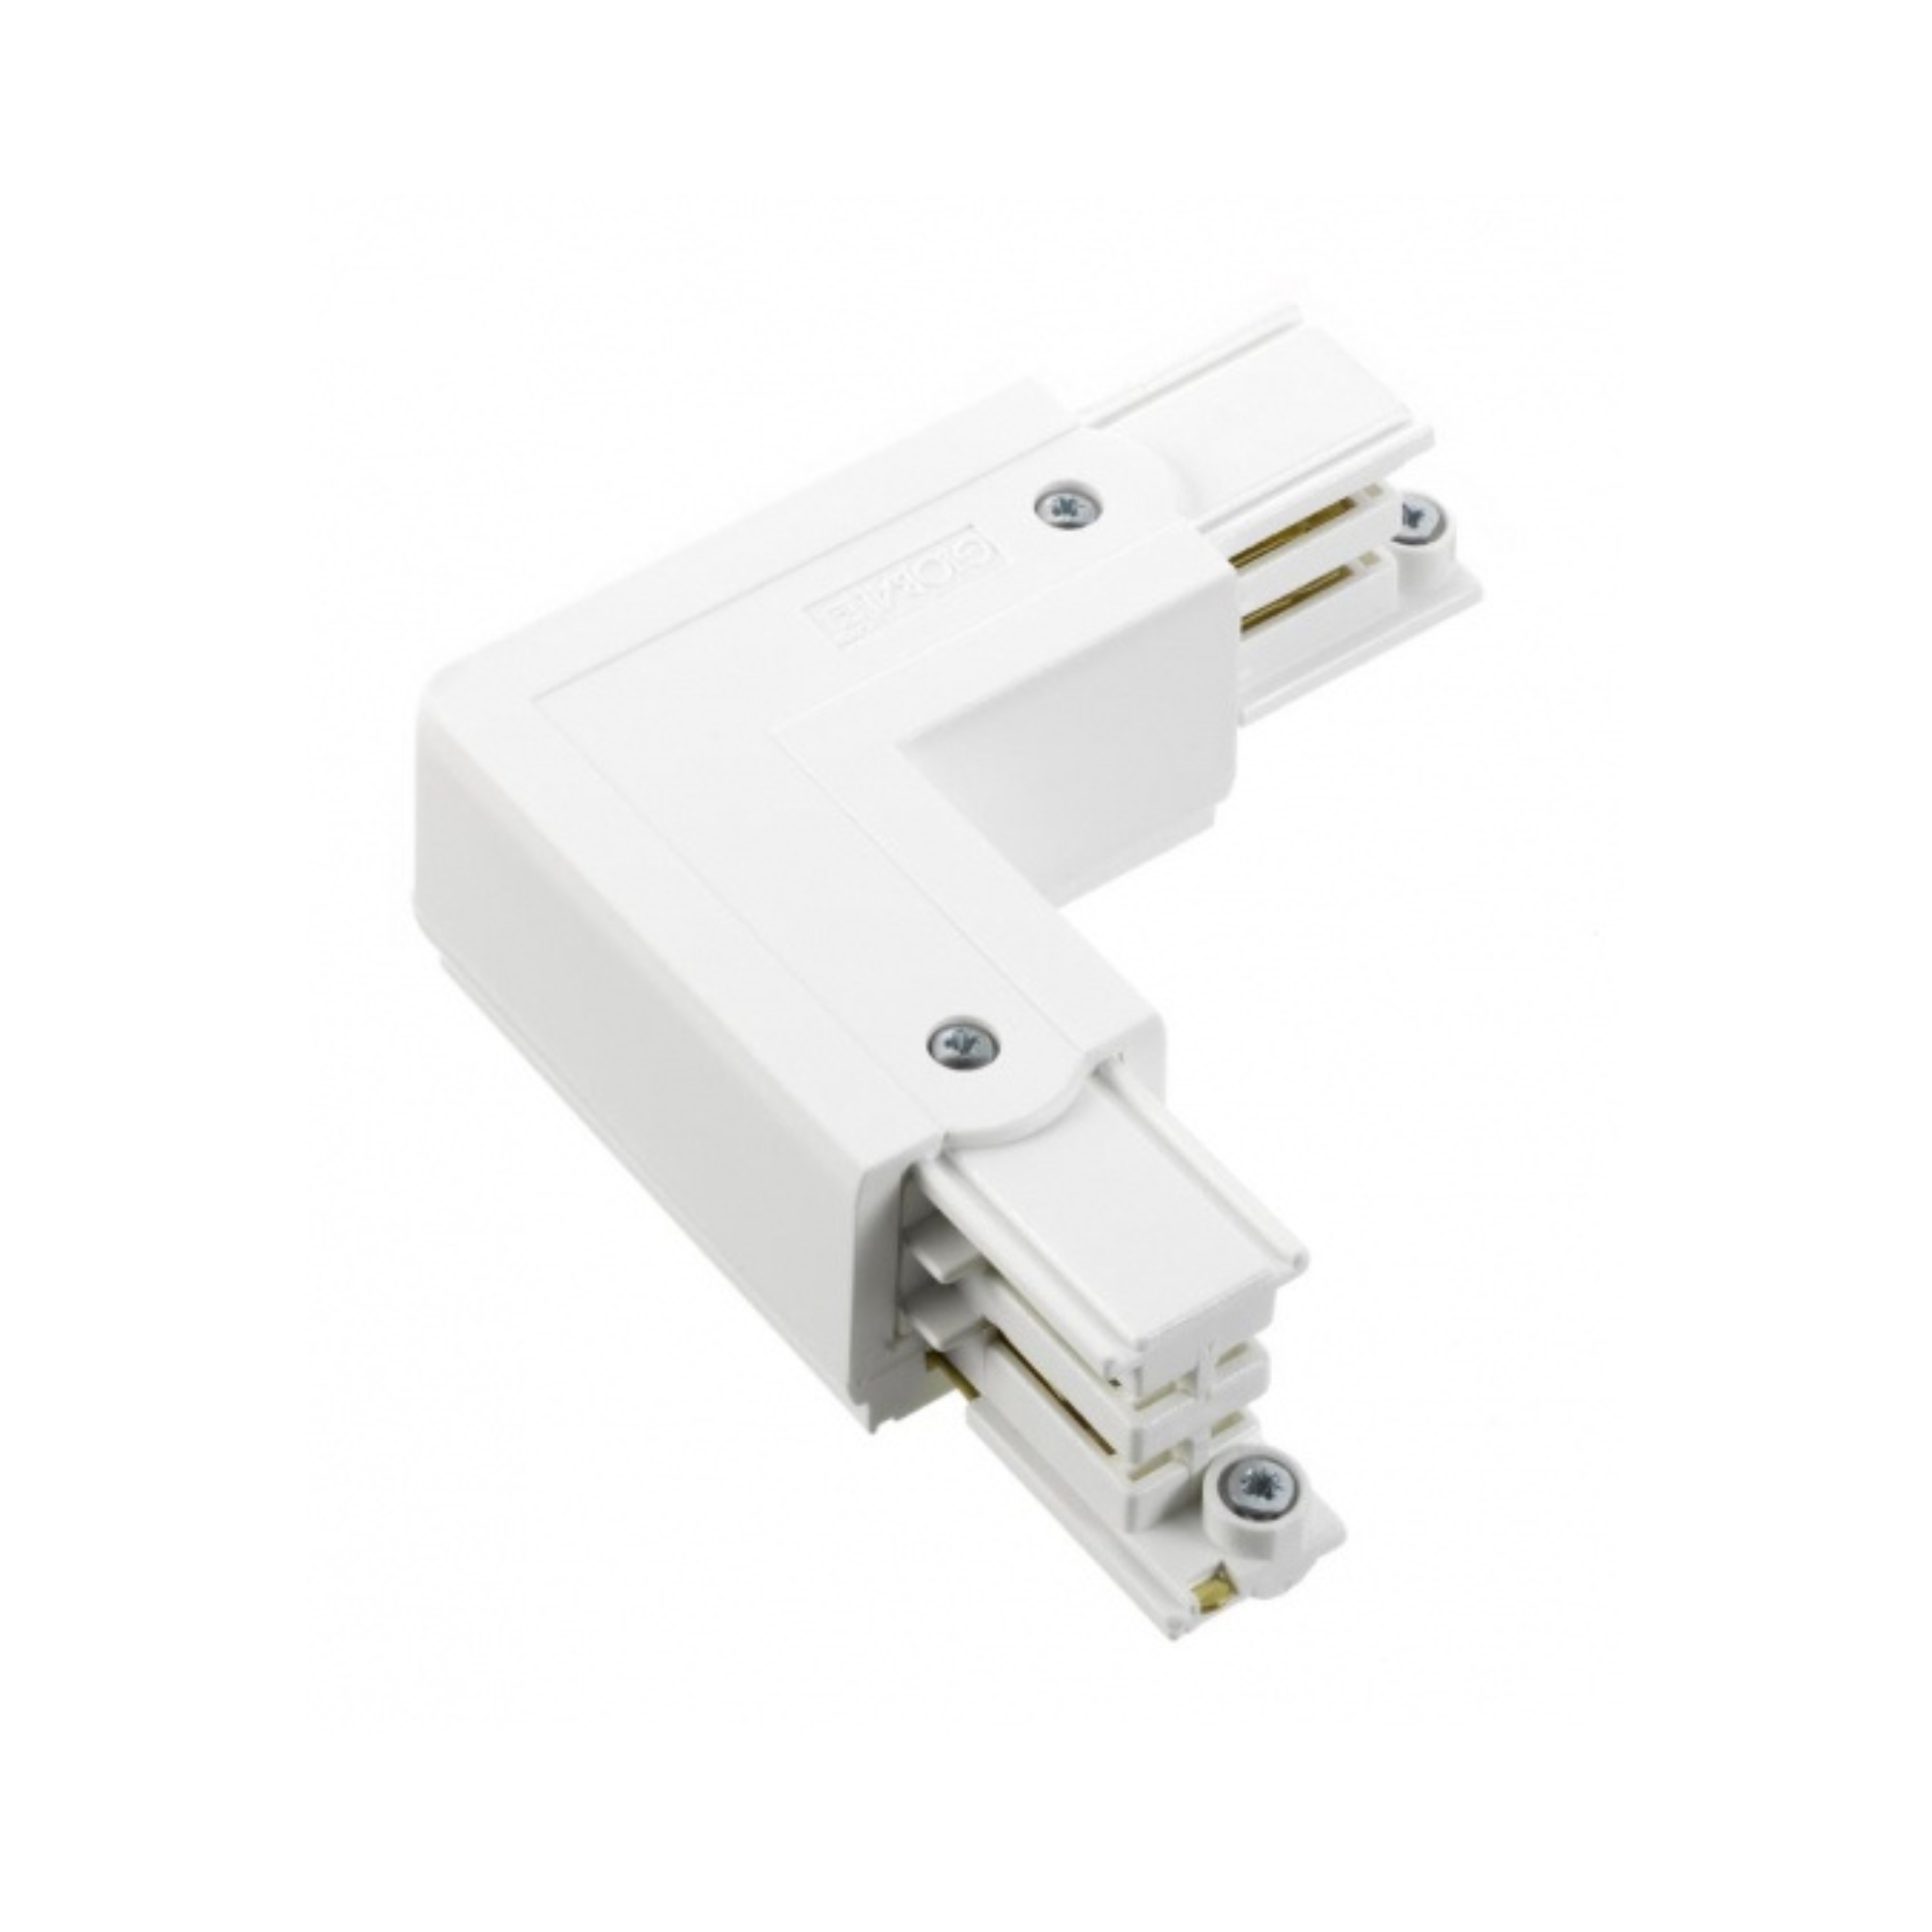 L CONNECTOR GLOBAL